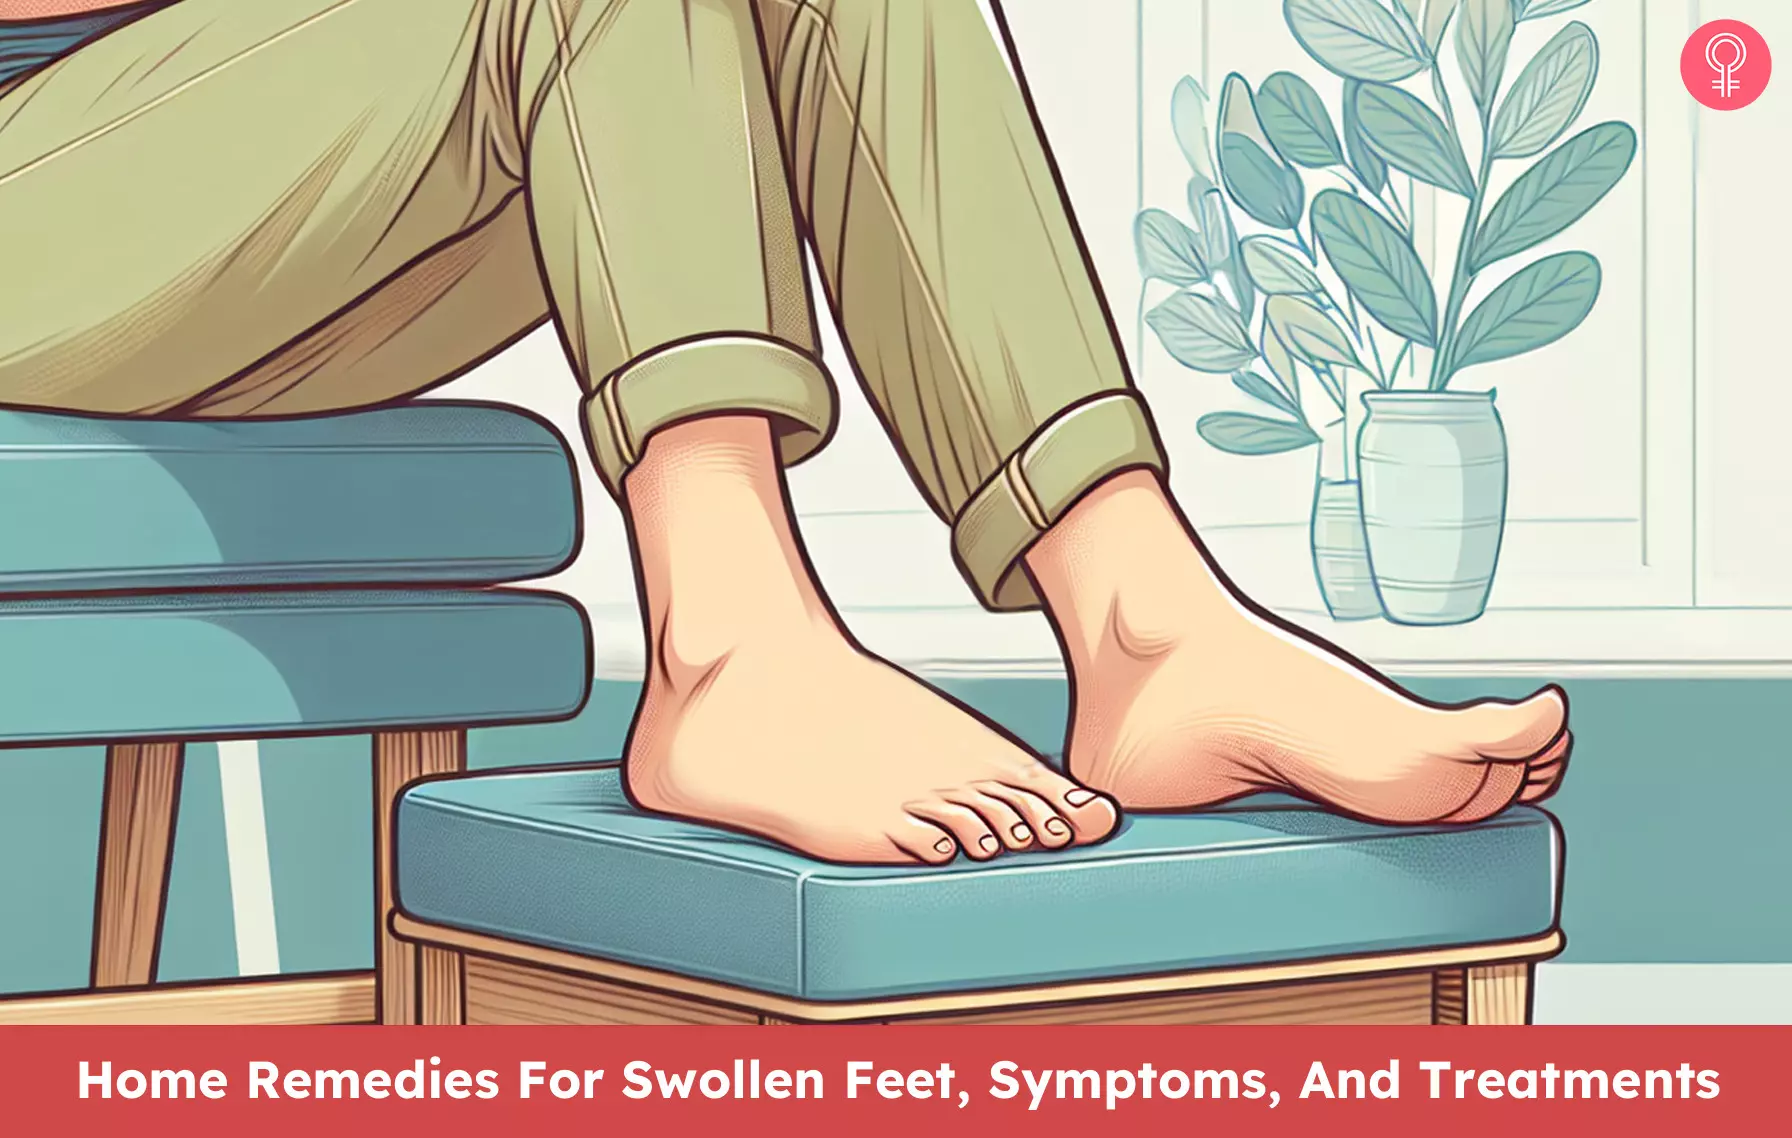 Home Remedies For Swollen Feet, Symptoms, And Treatments